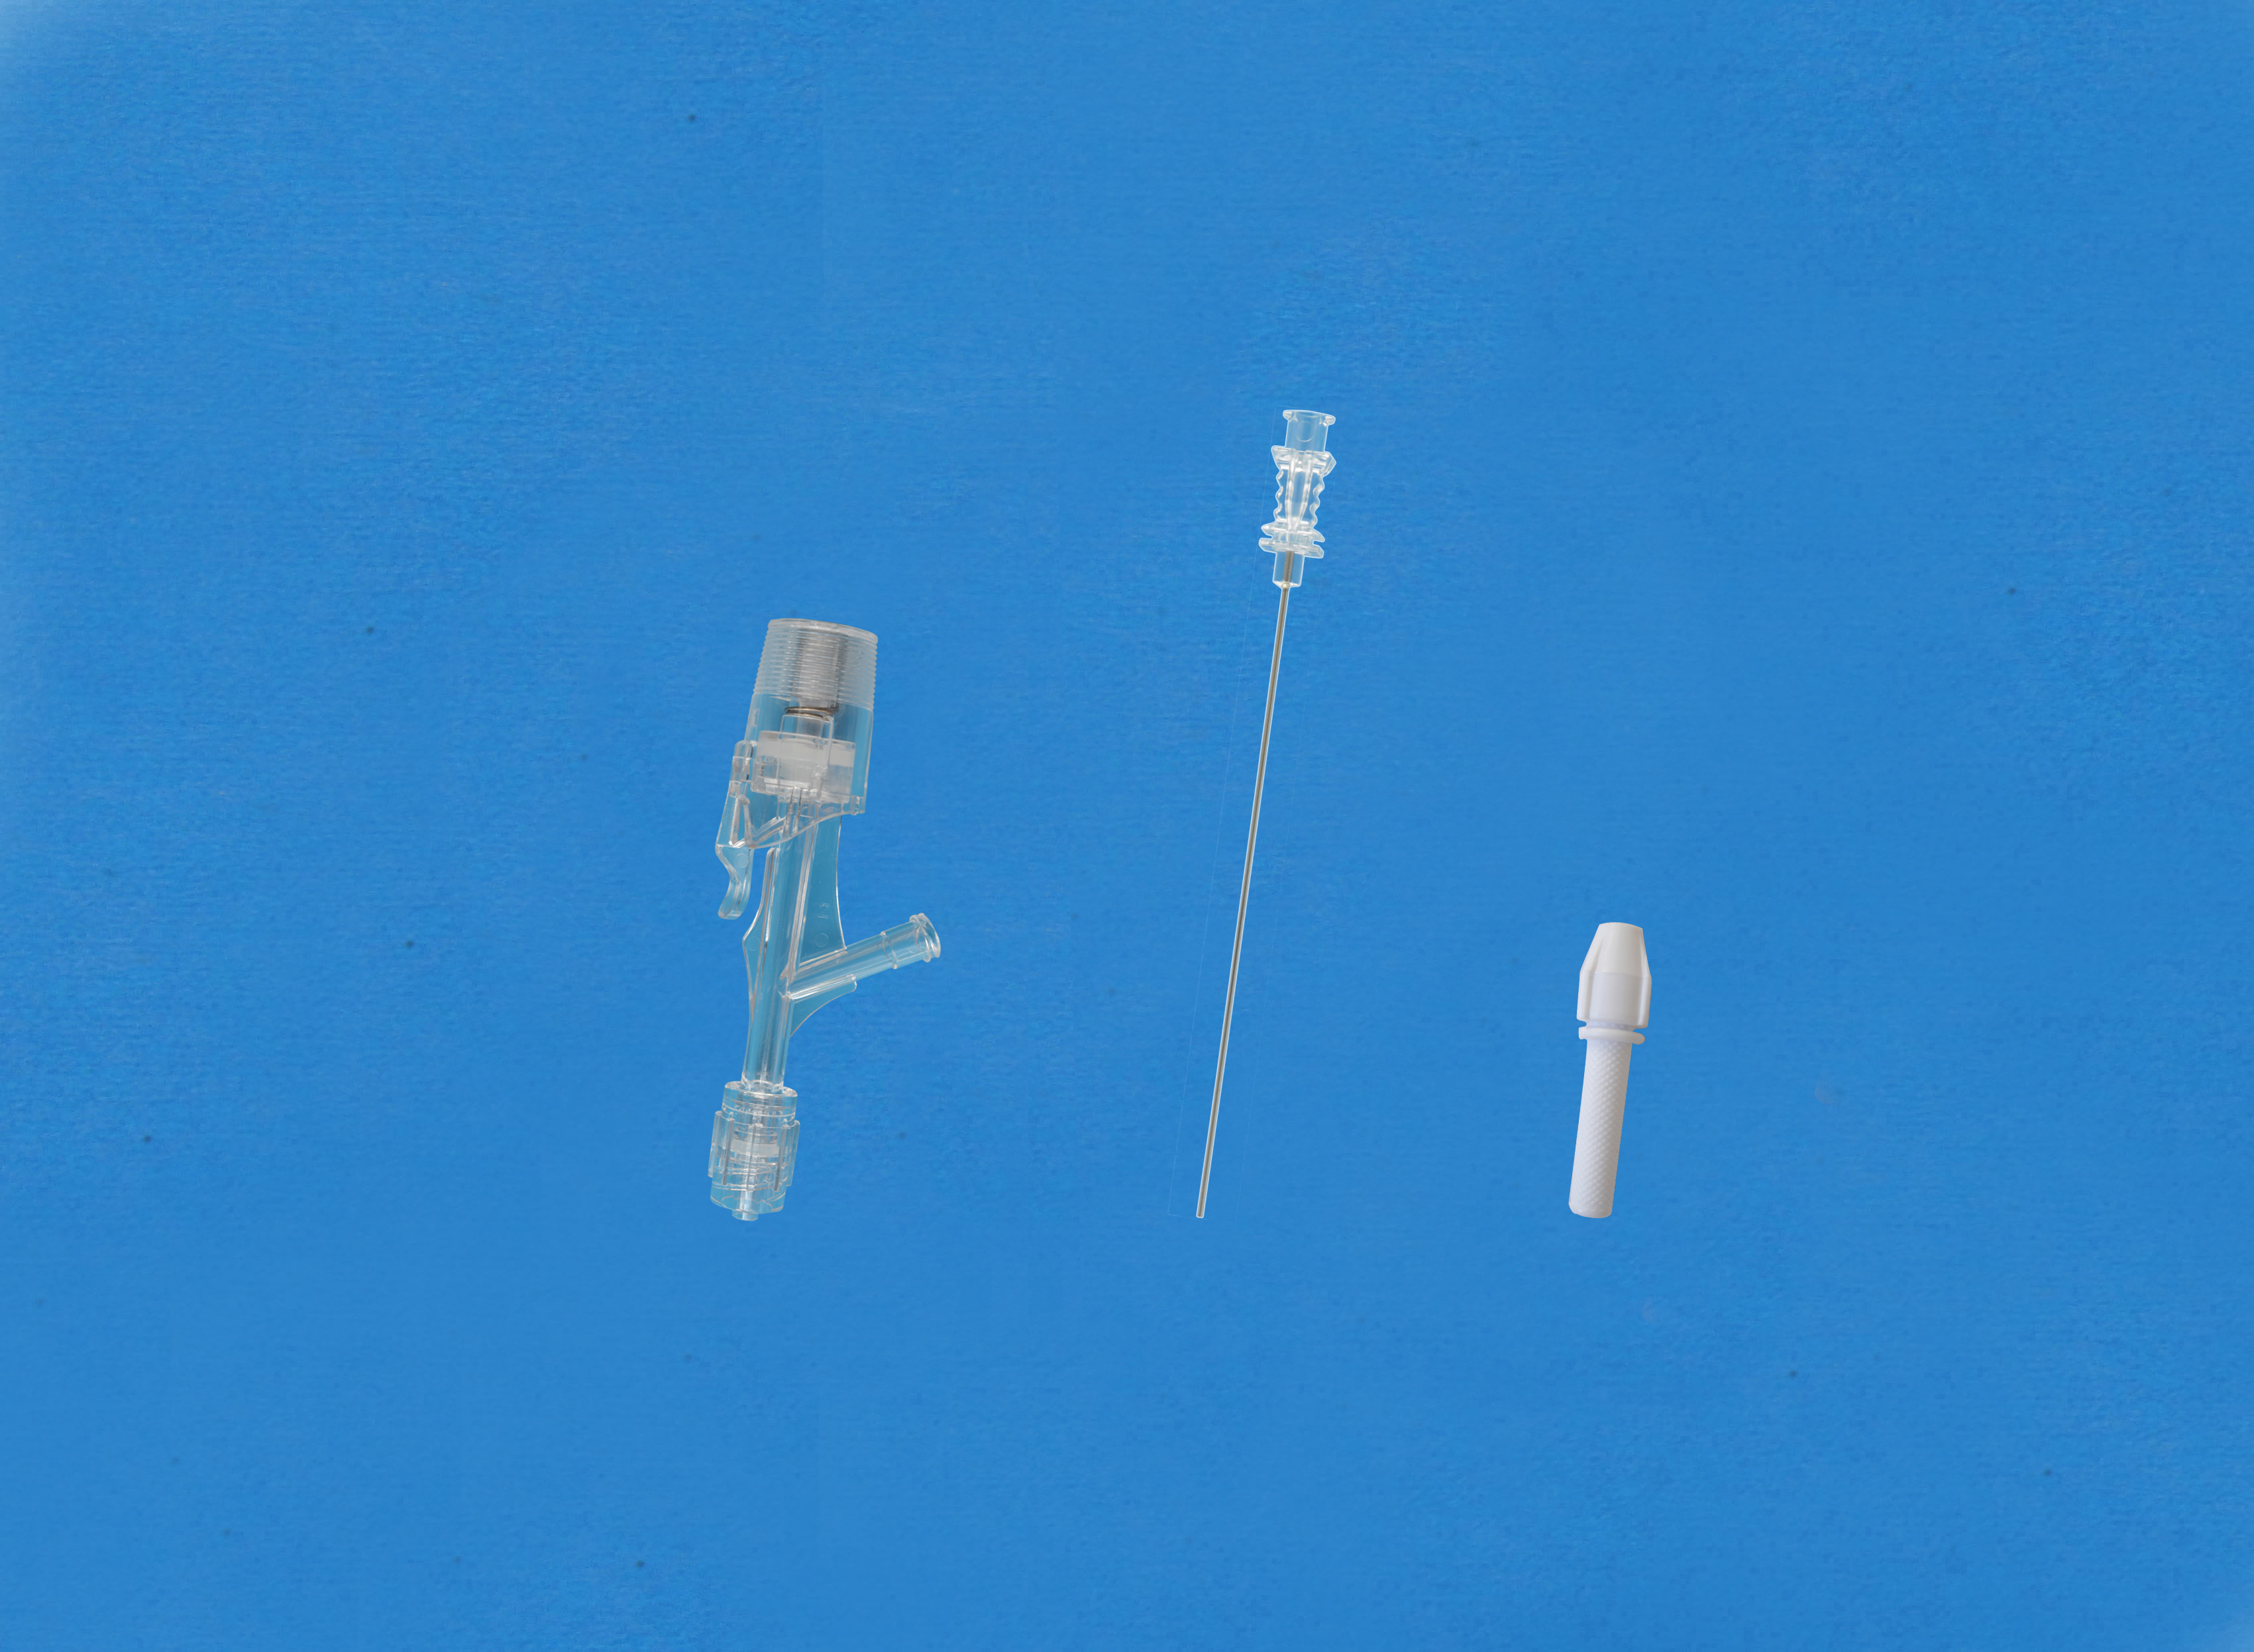 Haemostatic valves, Y click, Sideon Female Luer, Insertion Tool with Large Hub, White/Copper Torquer